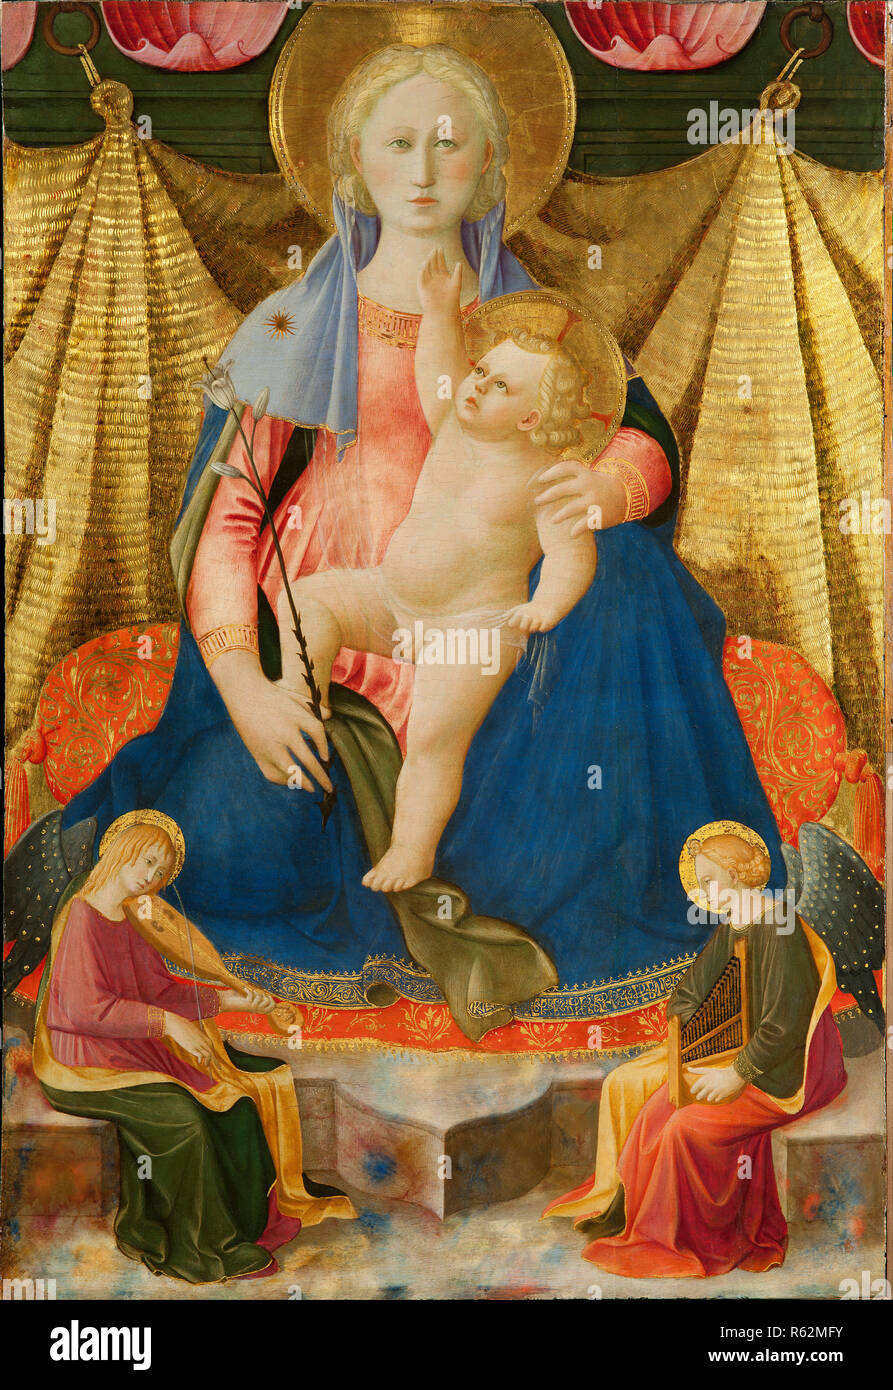 The Madonna of Humility with Two Musician Angels. Date/Period: 1448 - 1450. Panel. Height: 83.50 mm (3.28 in); Width: 56.80 mm (2.23 in). Author: ZANOBI STROZZI. STROZZI, ZANOBI. Stock Photo